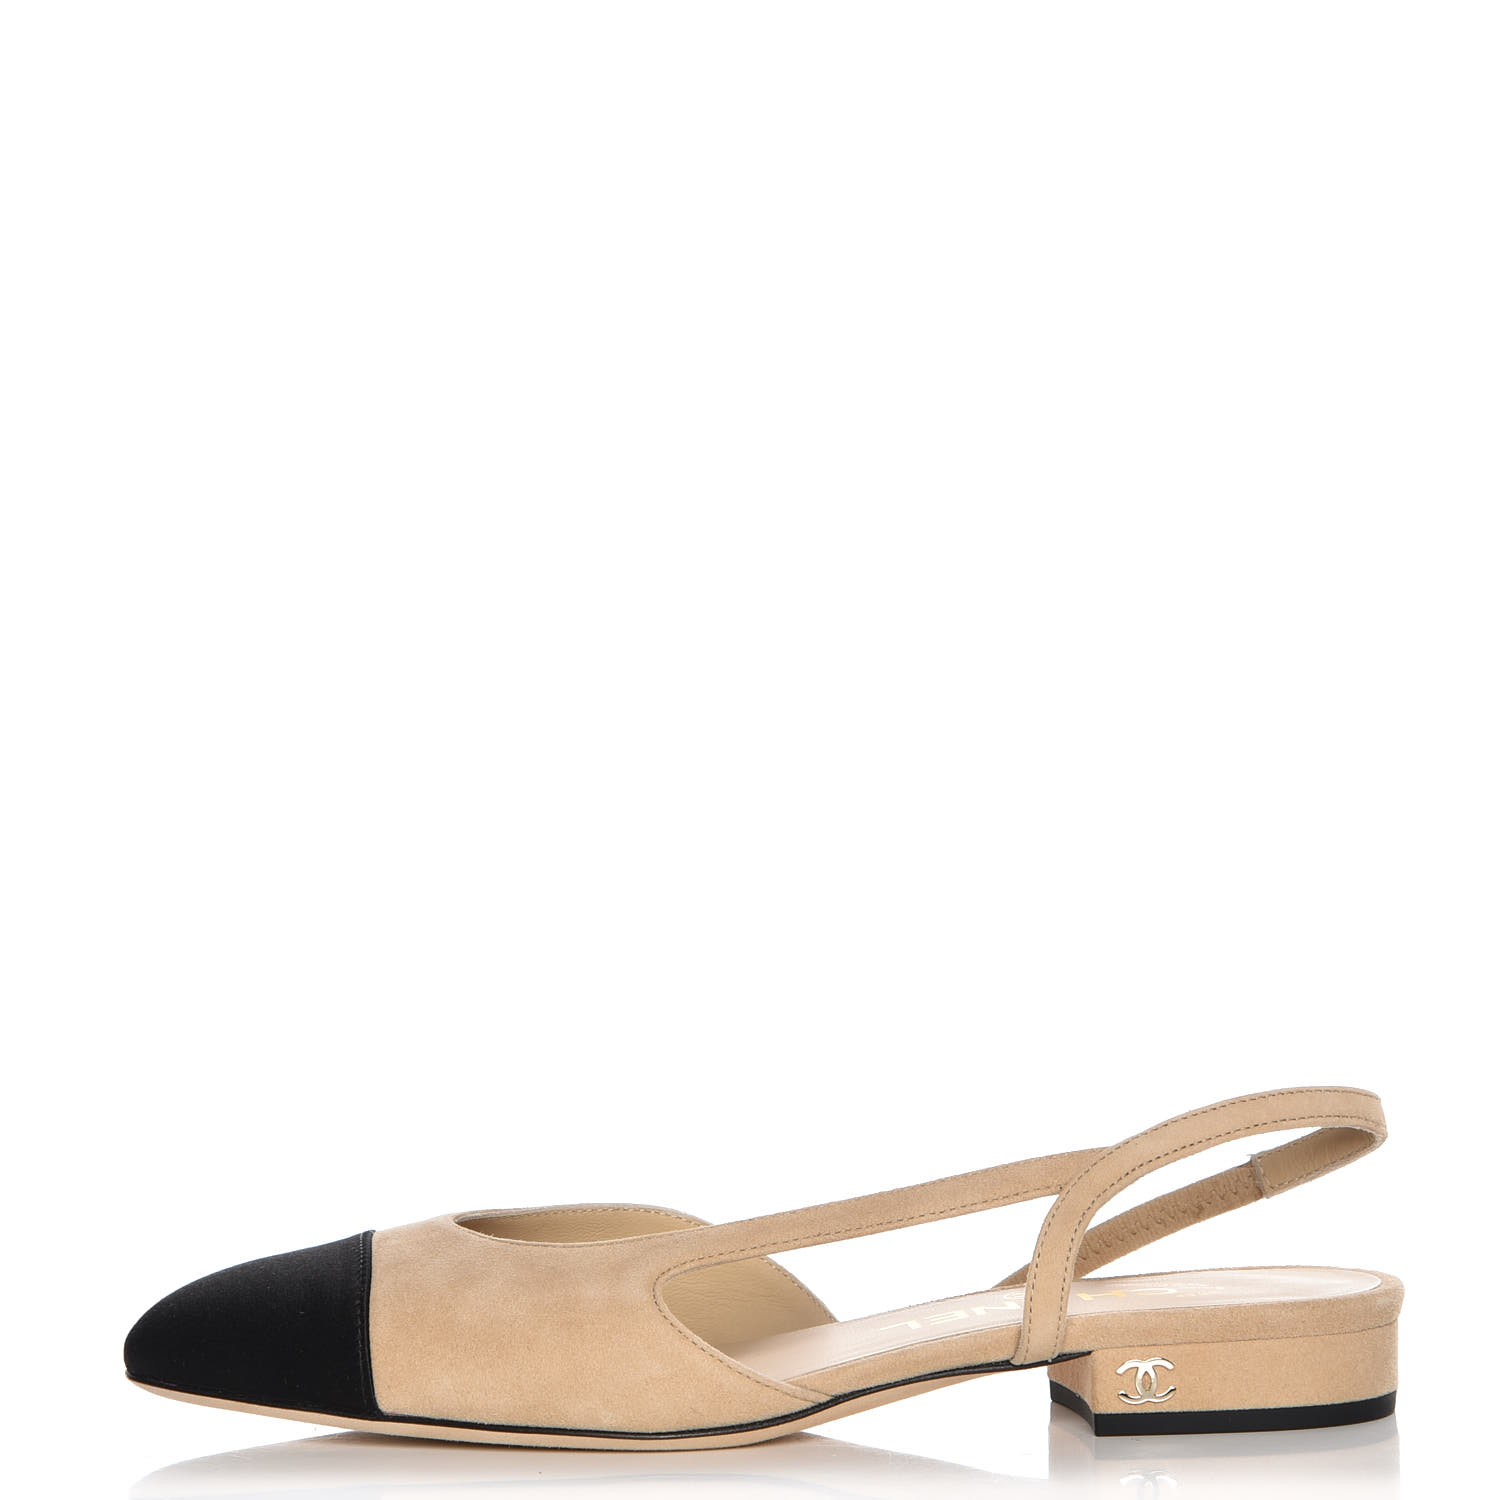 chanel slingback suede